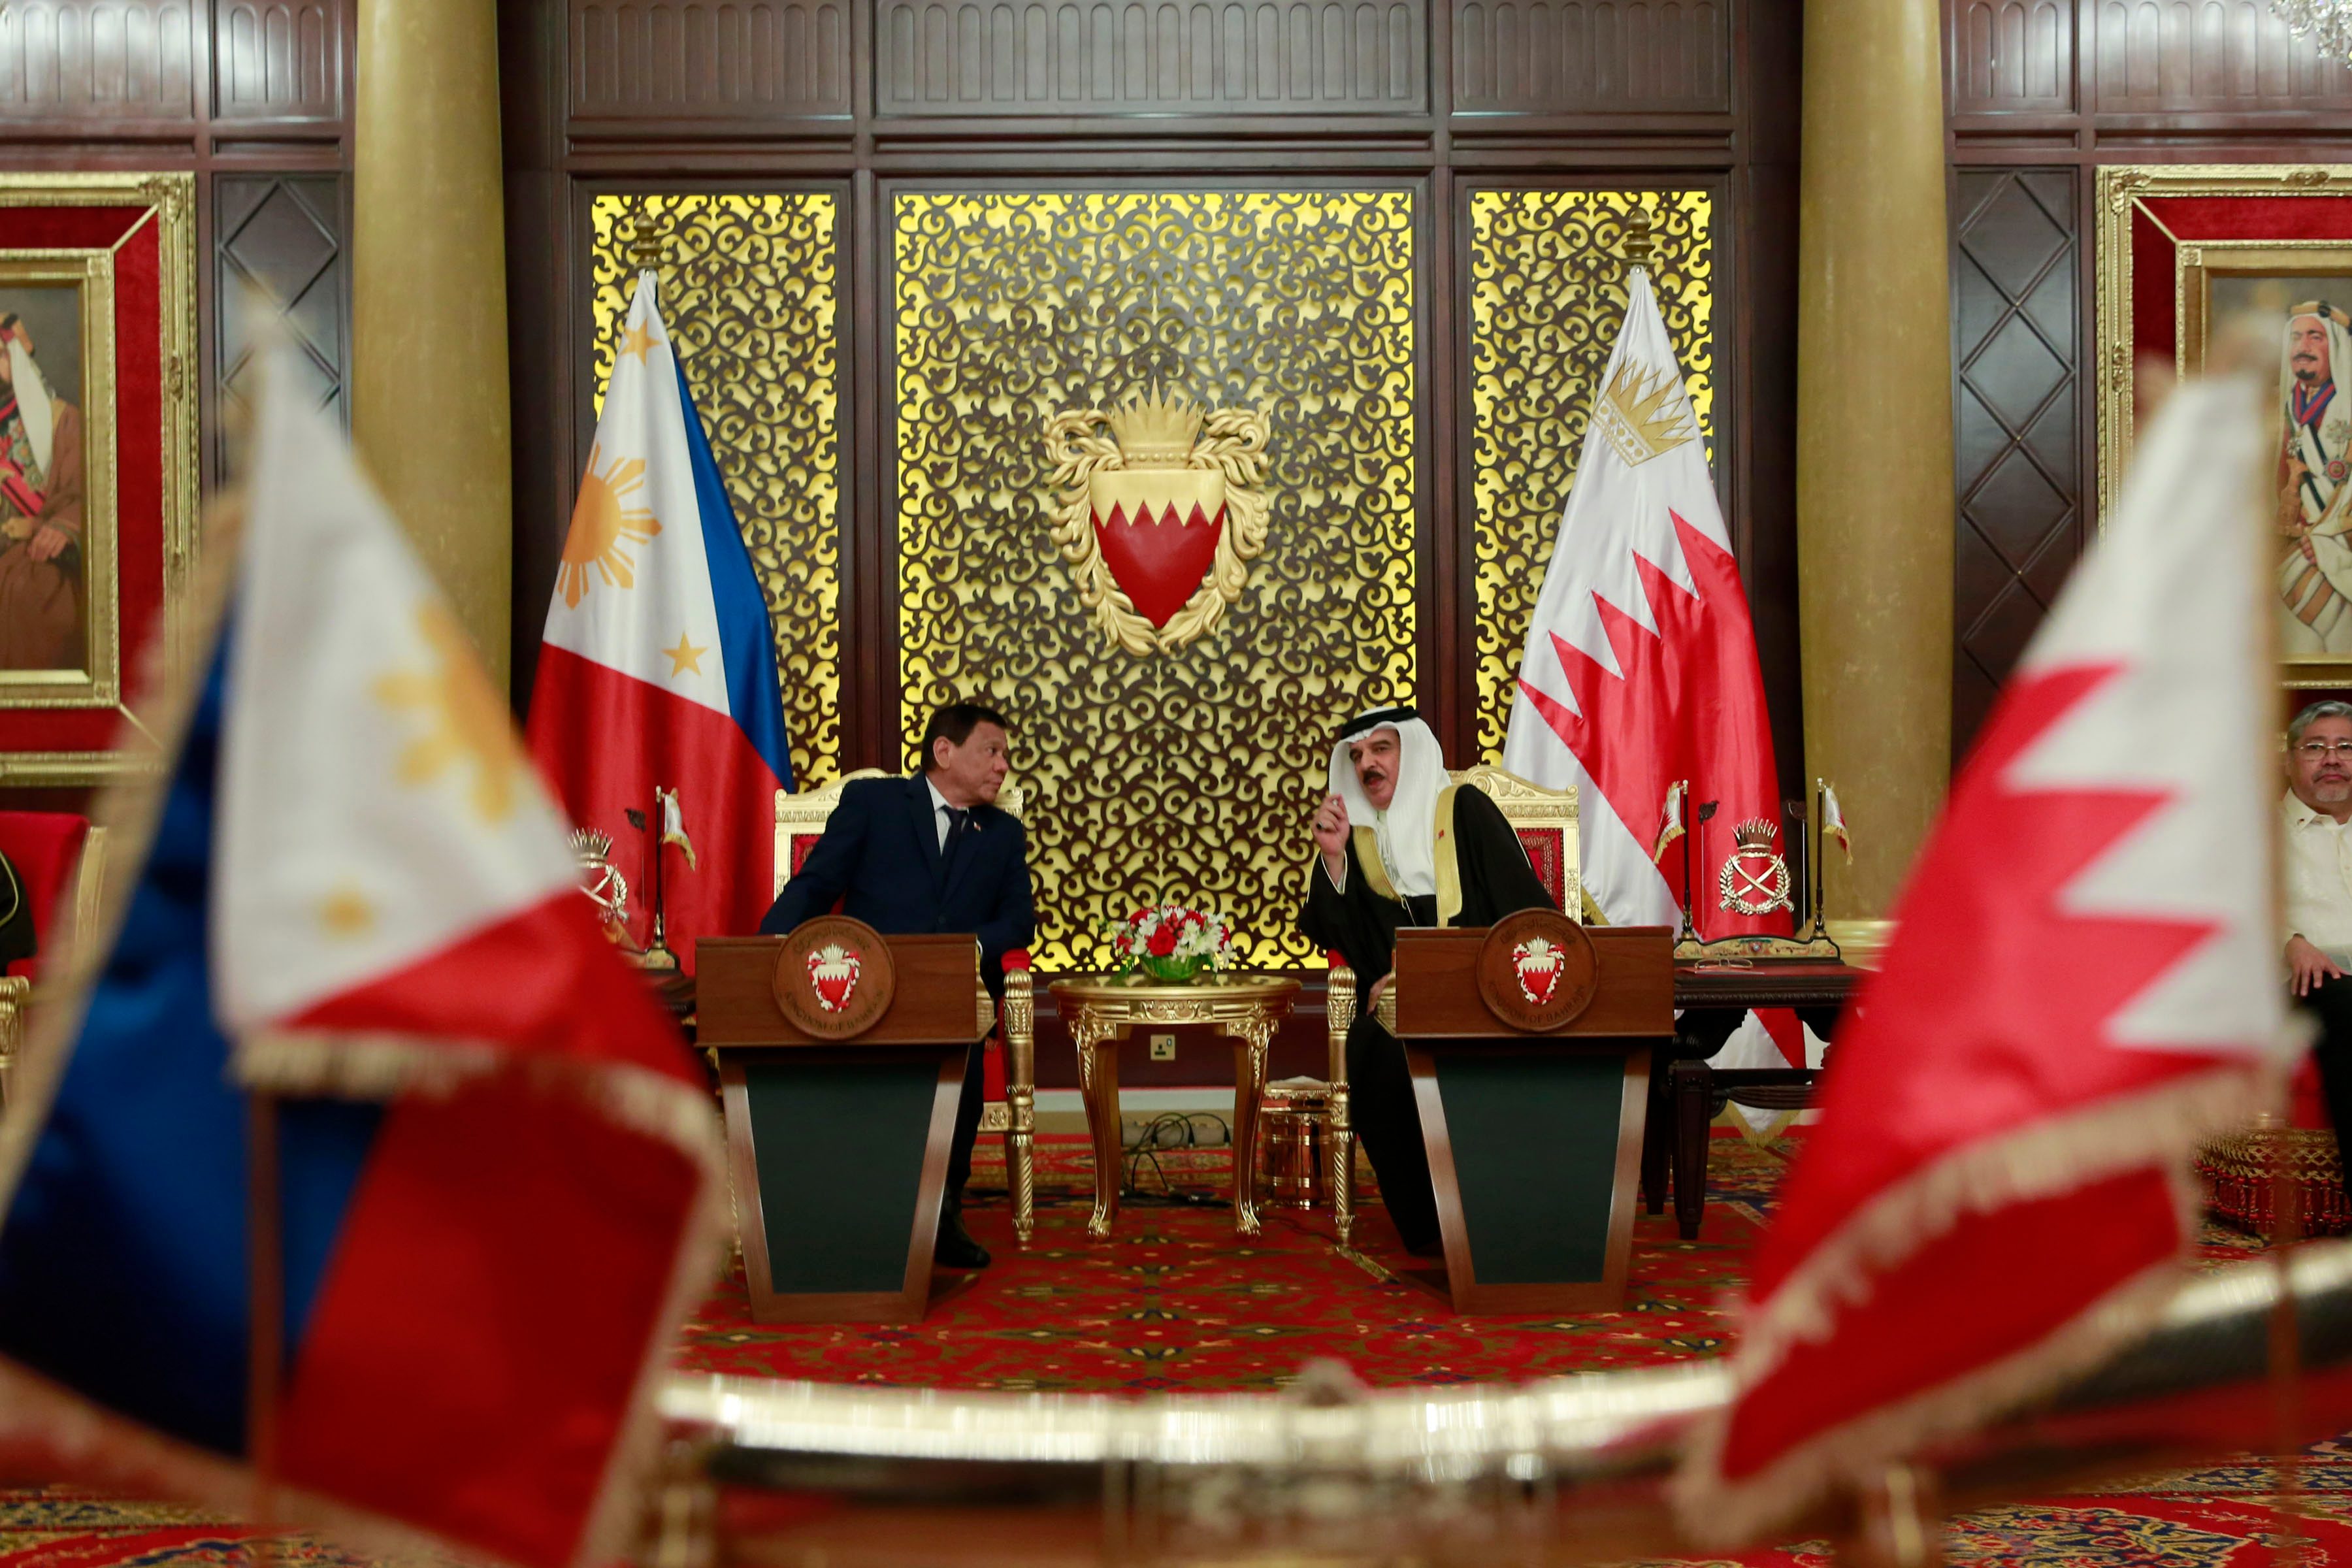 STATE VISIT. President Rodrigo Duterte and Bahrain's King Hamad Bin Isa Al Khalifa met prior to the signing ceremony of agreements between their countries at the Sakhir Palace in Bahrain on April 13, 2017. Malacanang Photo   